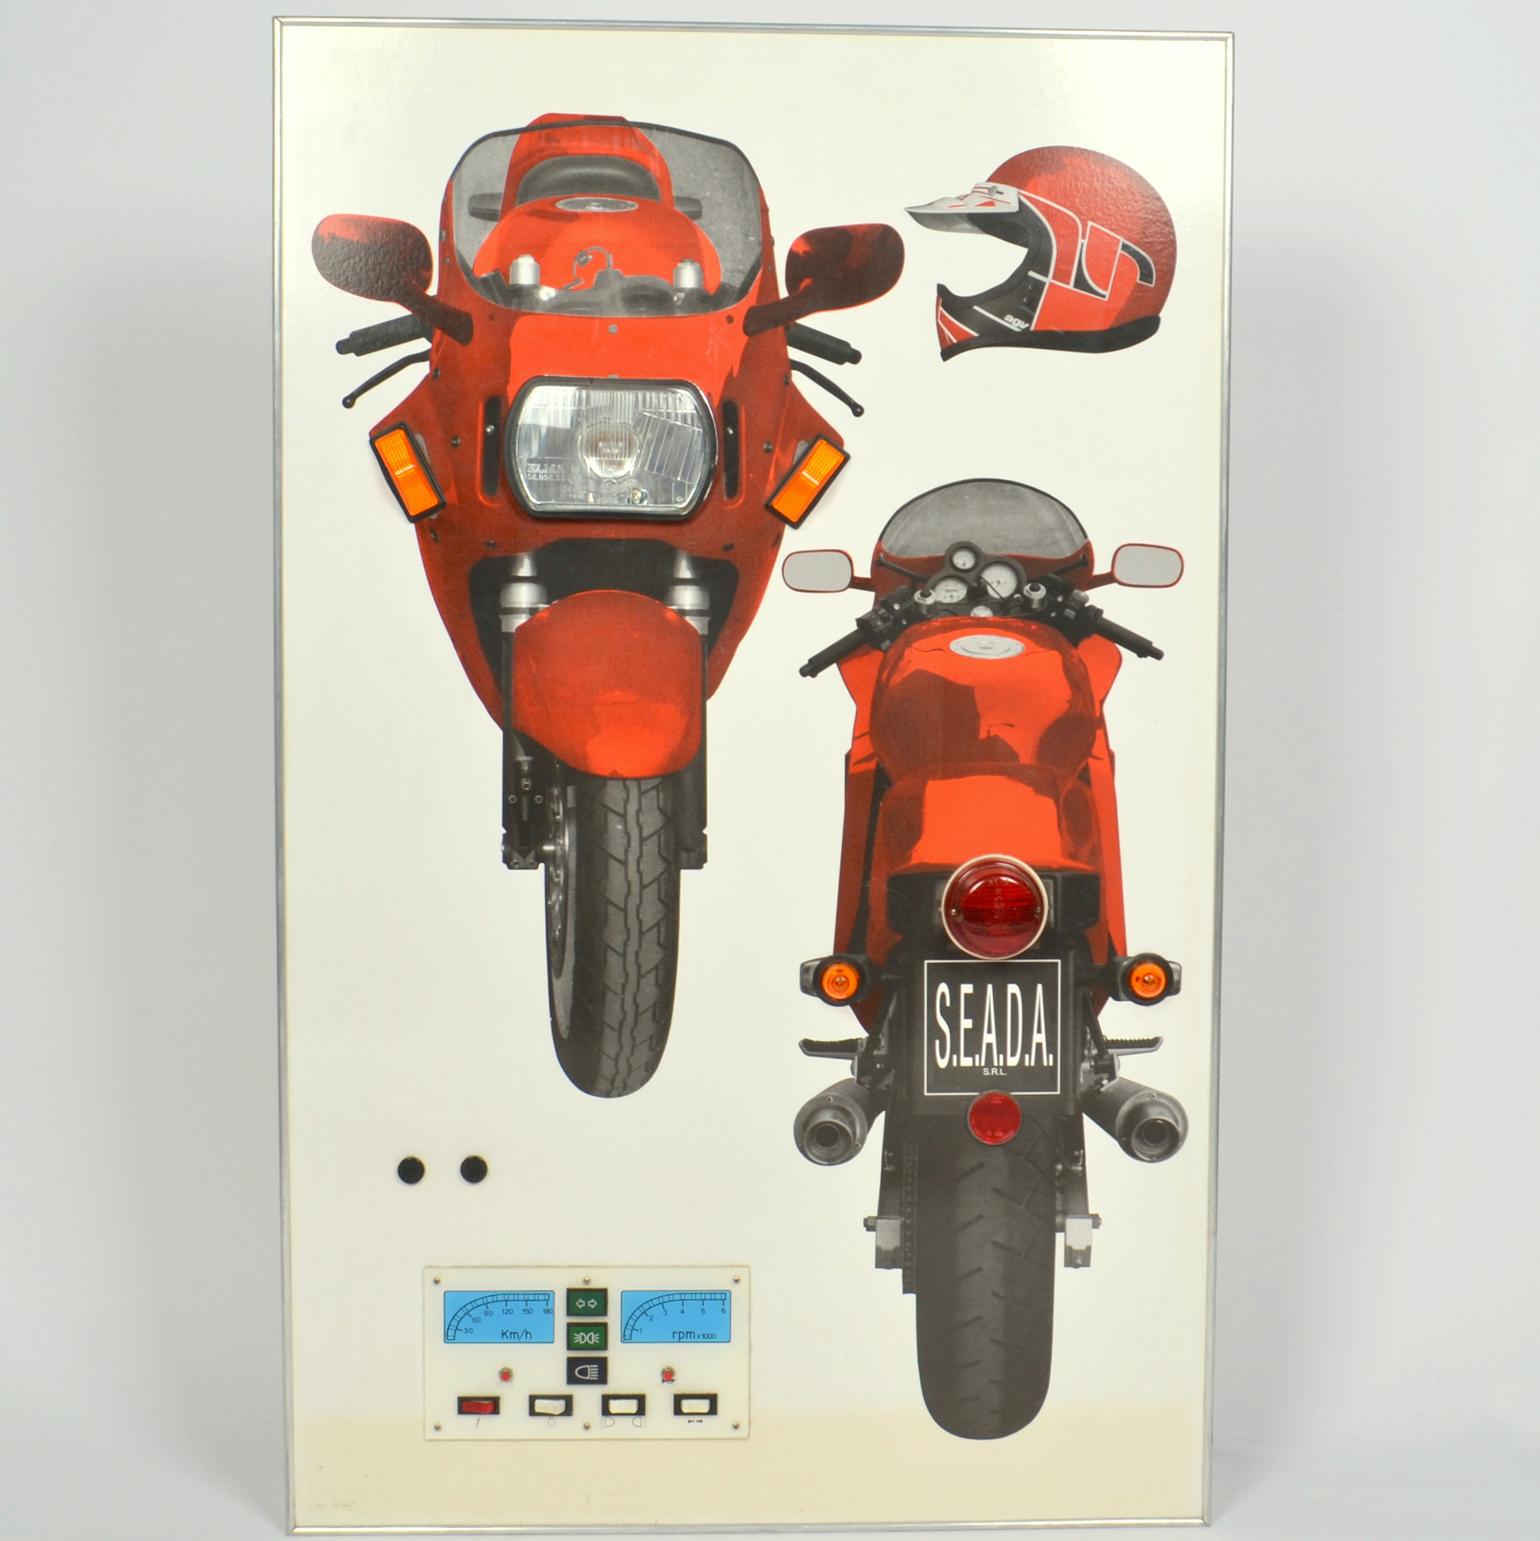 The wall mounted 1970s artwork demonstrating driving instructions about the use of motorbike lights. The manual instruction panel at the bottom can be used to switch on the various car lights and learn about the function of the operation of the